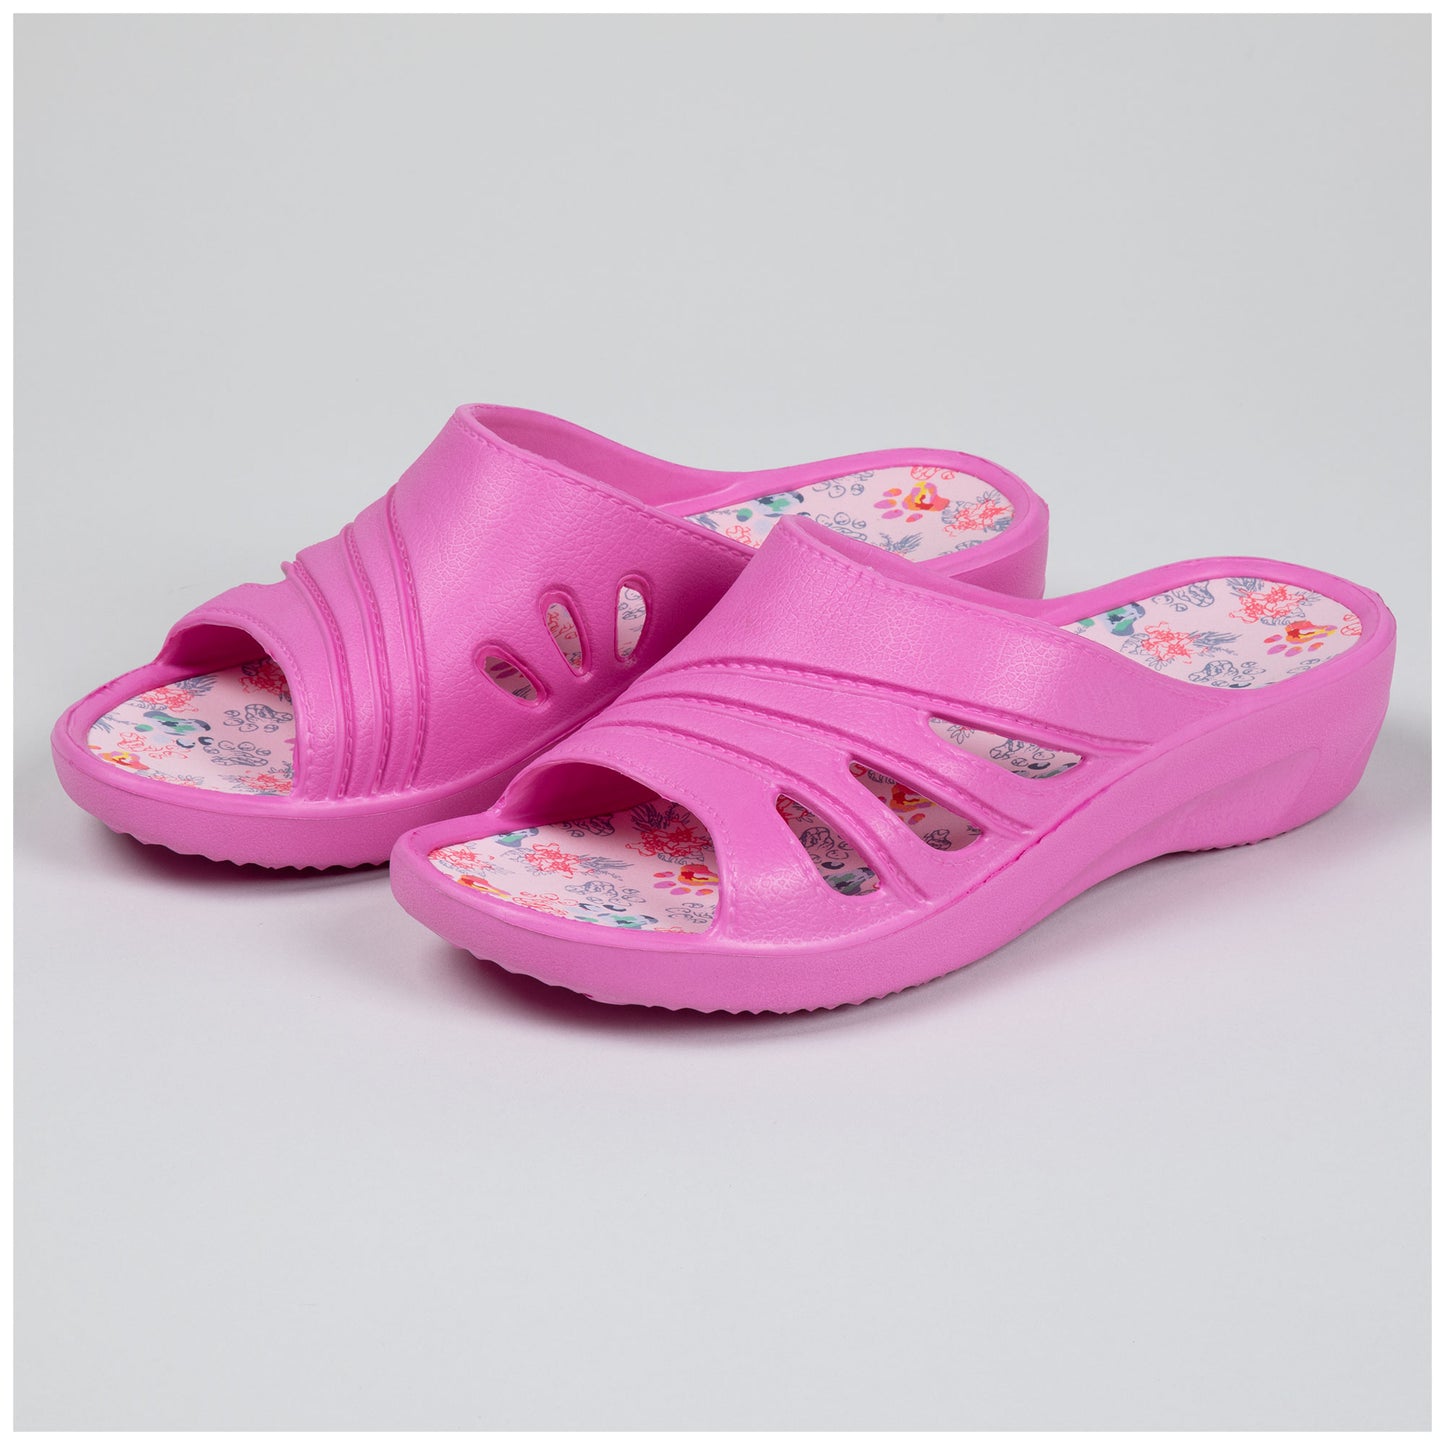 Pawsitively Classic Slide Sandals